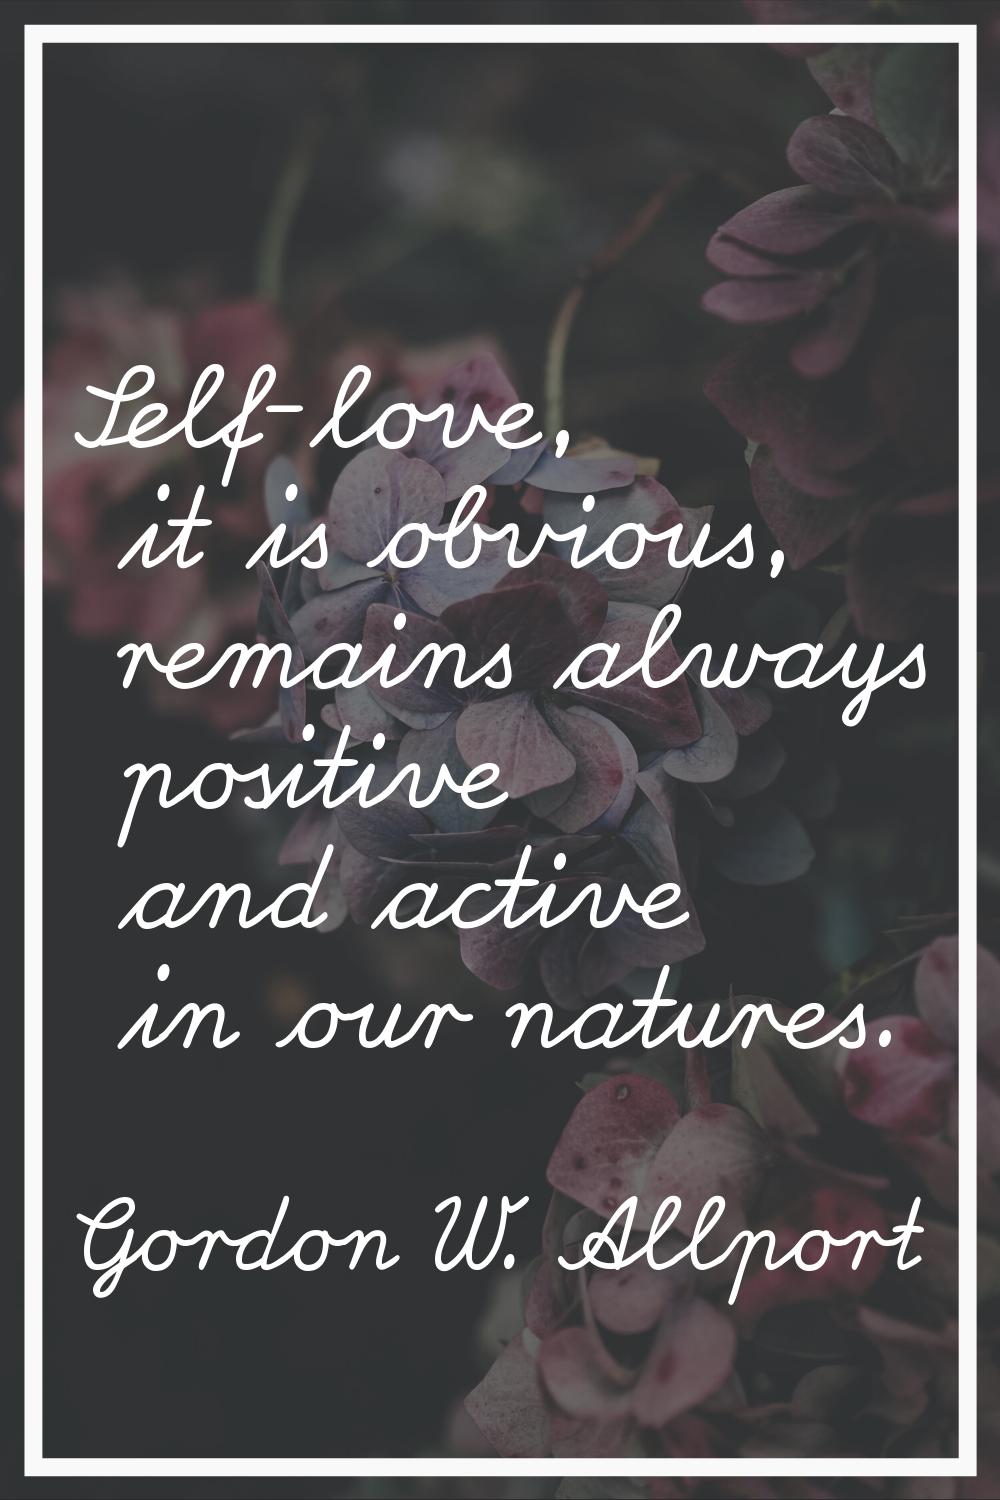 Self-love, it is obvious, remains always positive and active in our natures.